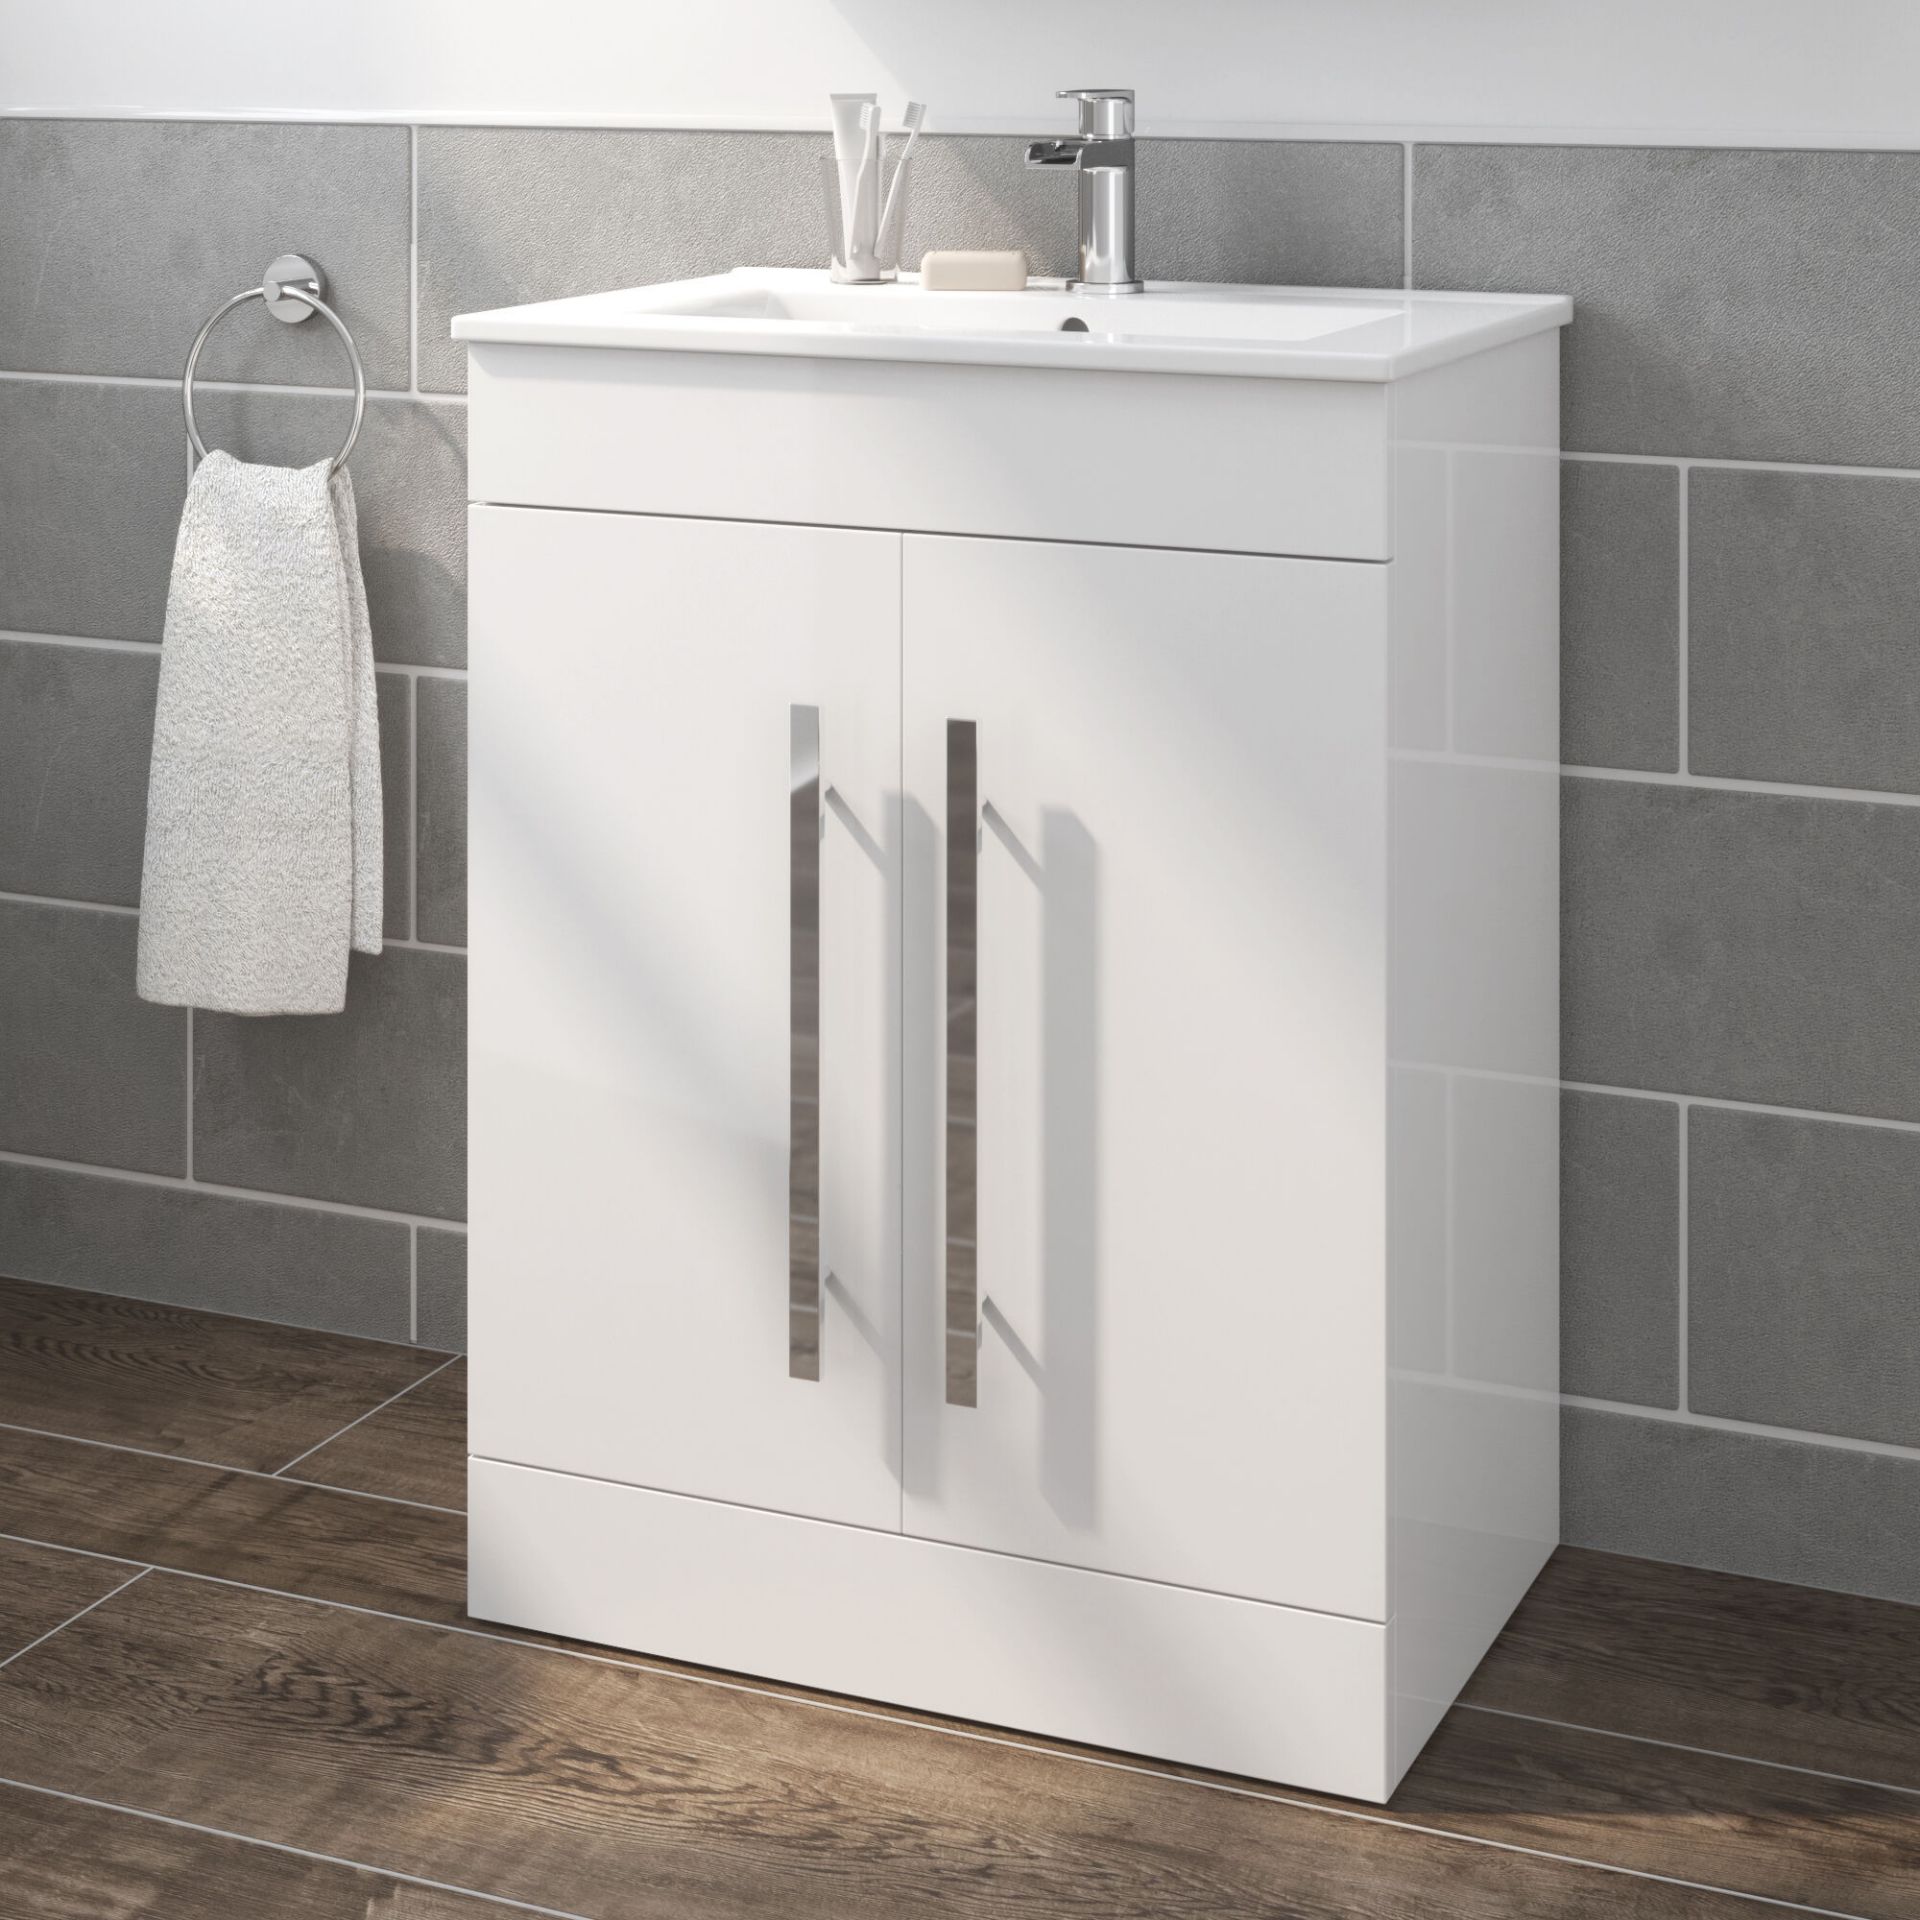 (A67) 600mm Avon High Gloss White Sink Cabinet - Floor Standing. Comes complete with basin. Re...